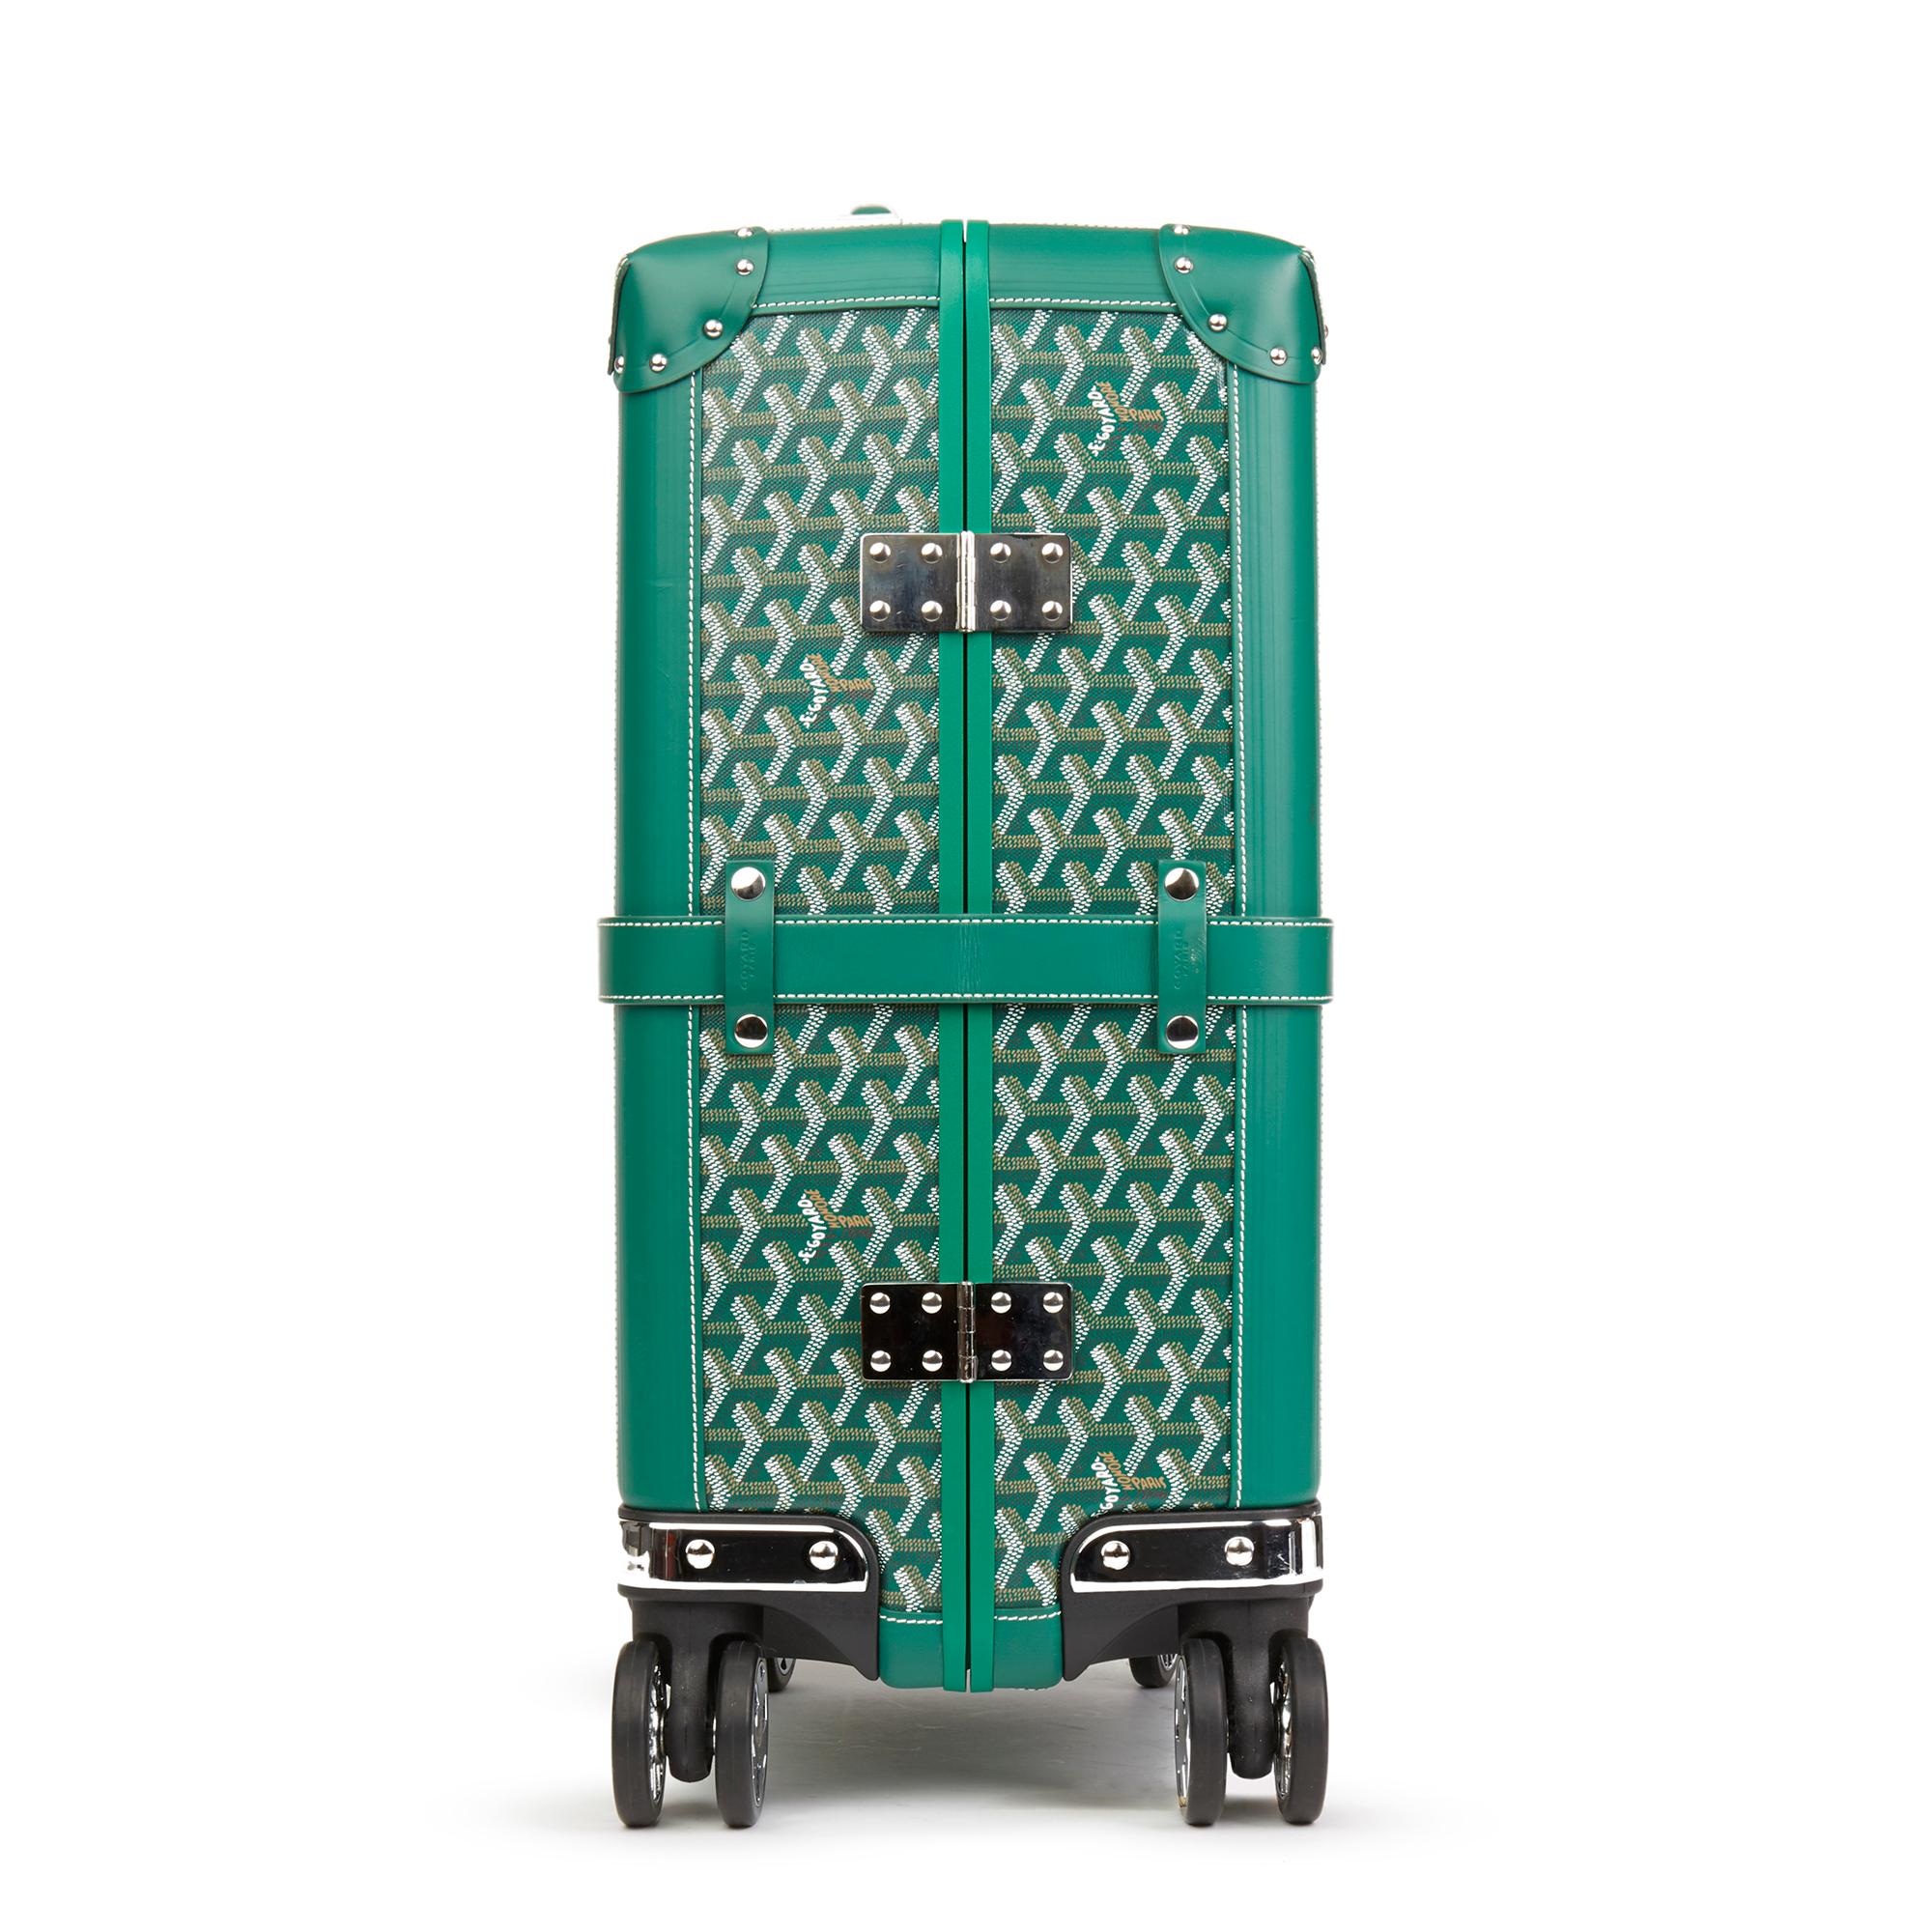 GOYARD Bourget PM Carry On Cabin Trolley Green Luhhage Case Brand